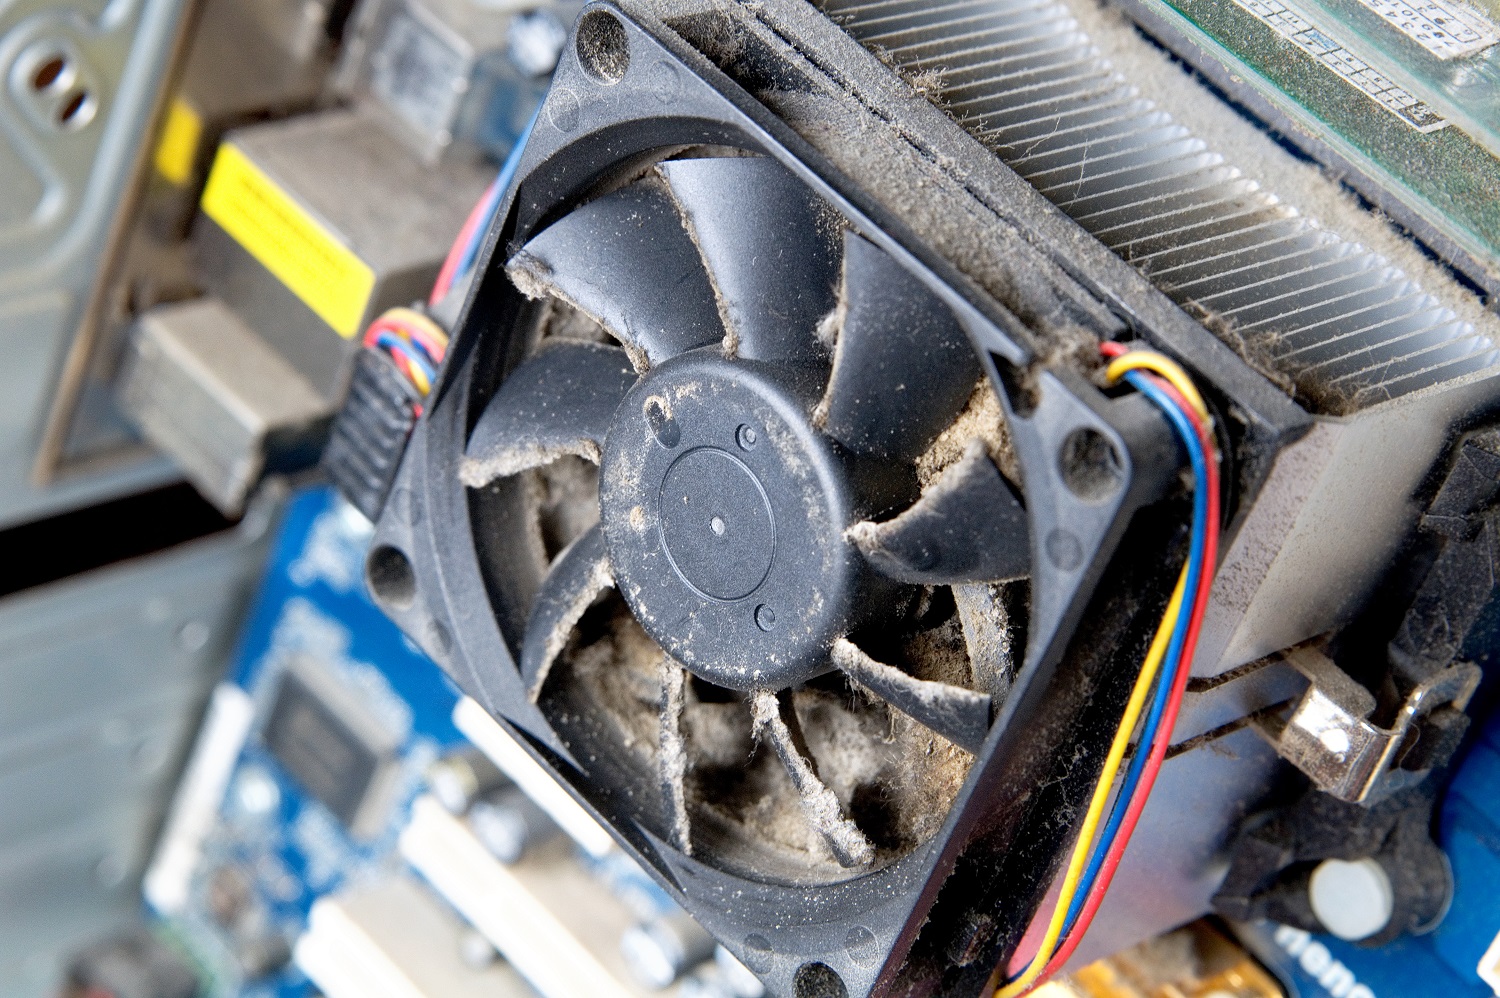 how to clean a macbook pro fan from dust